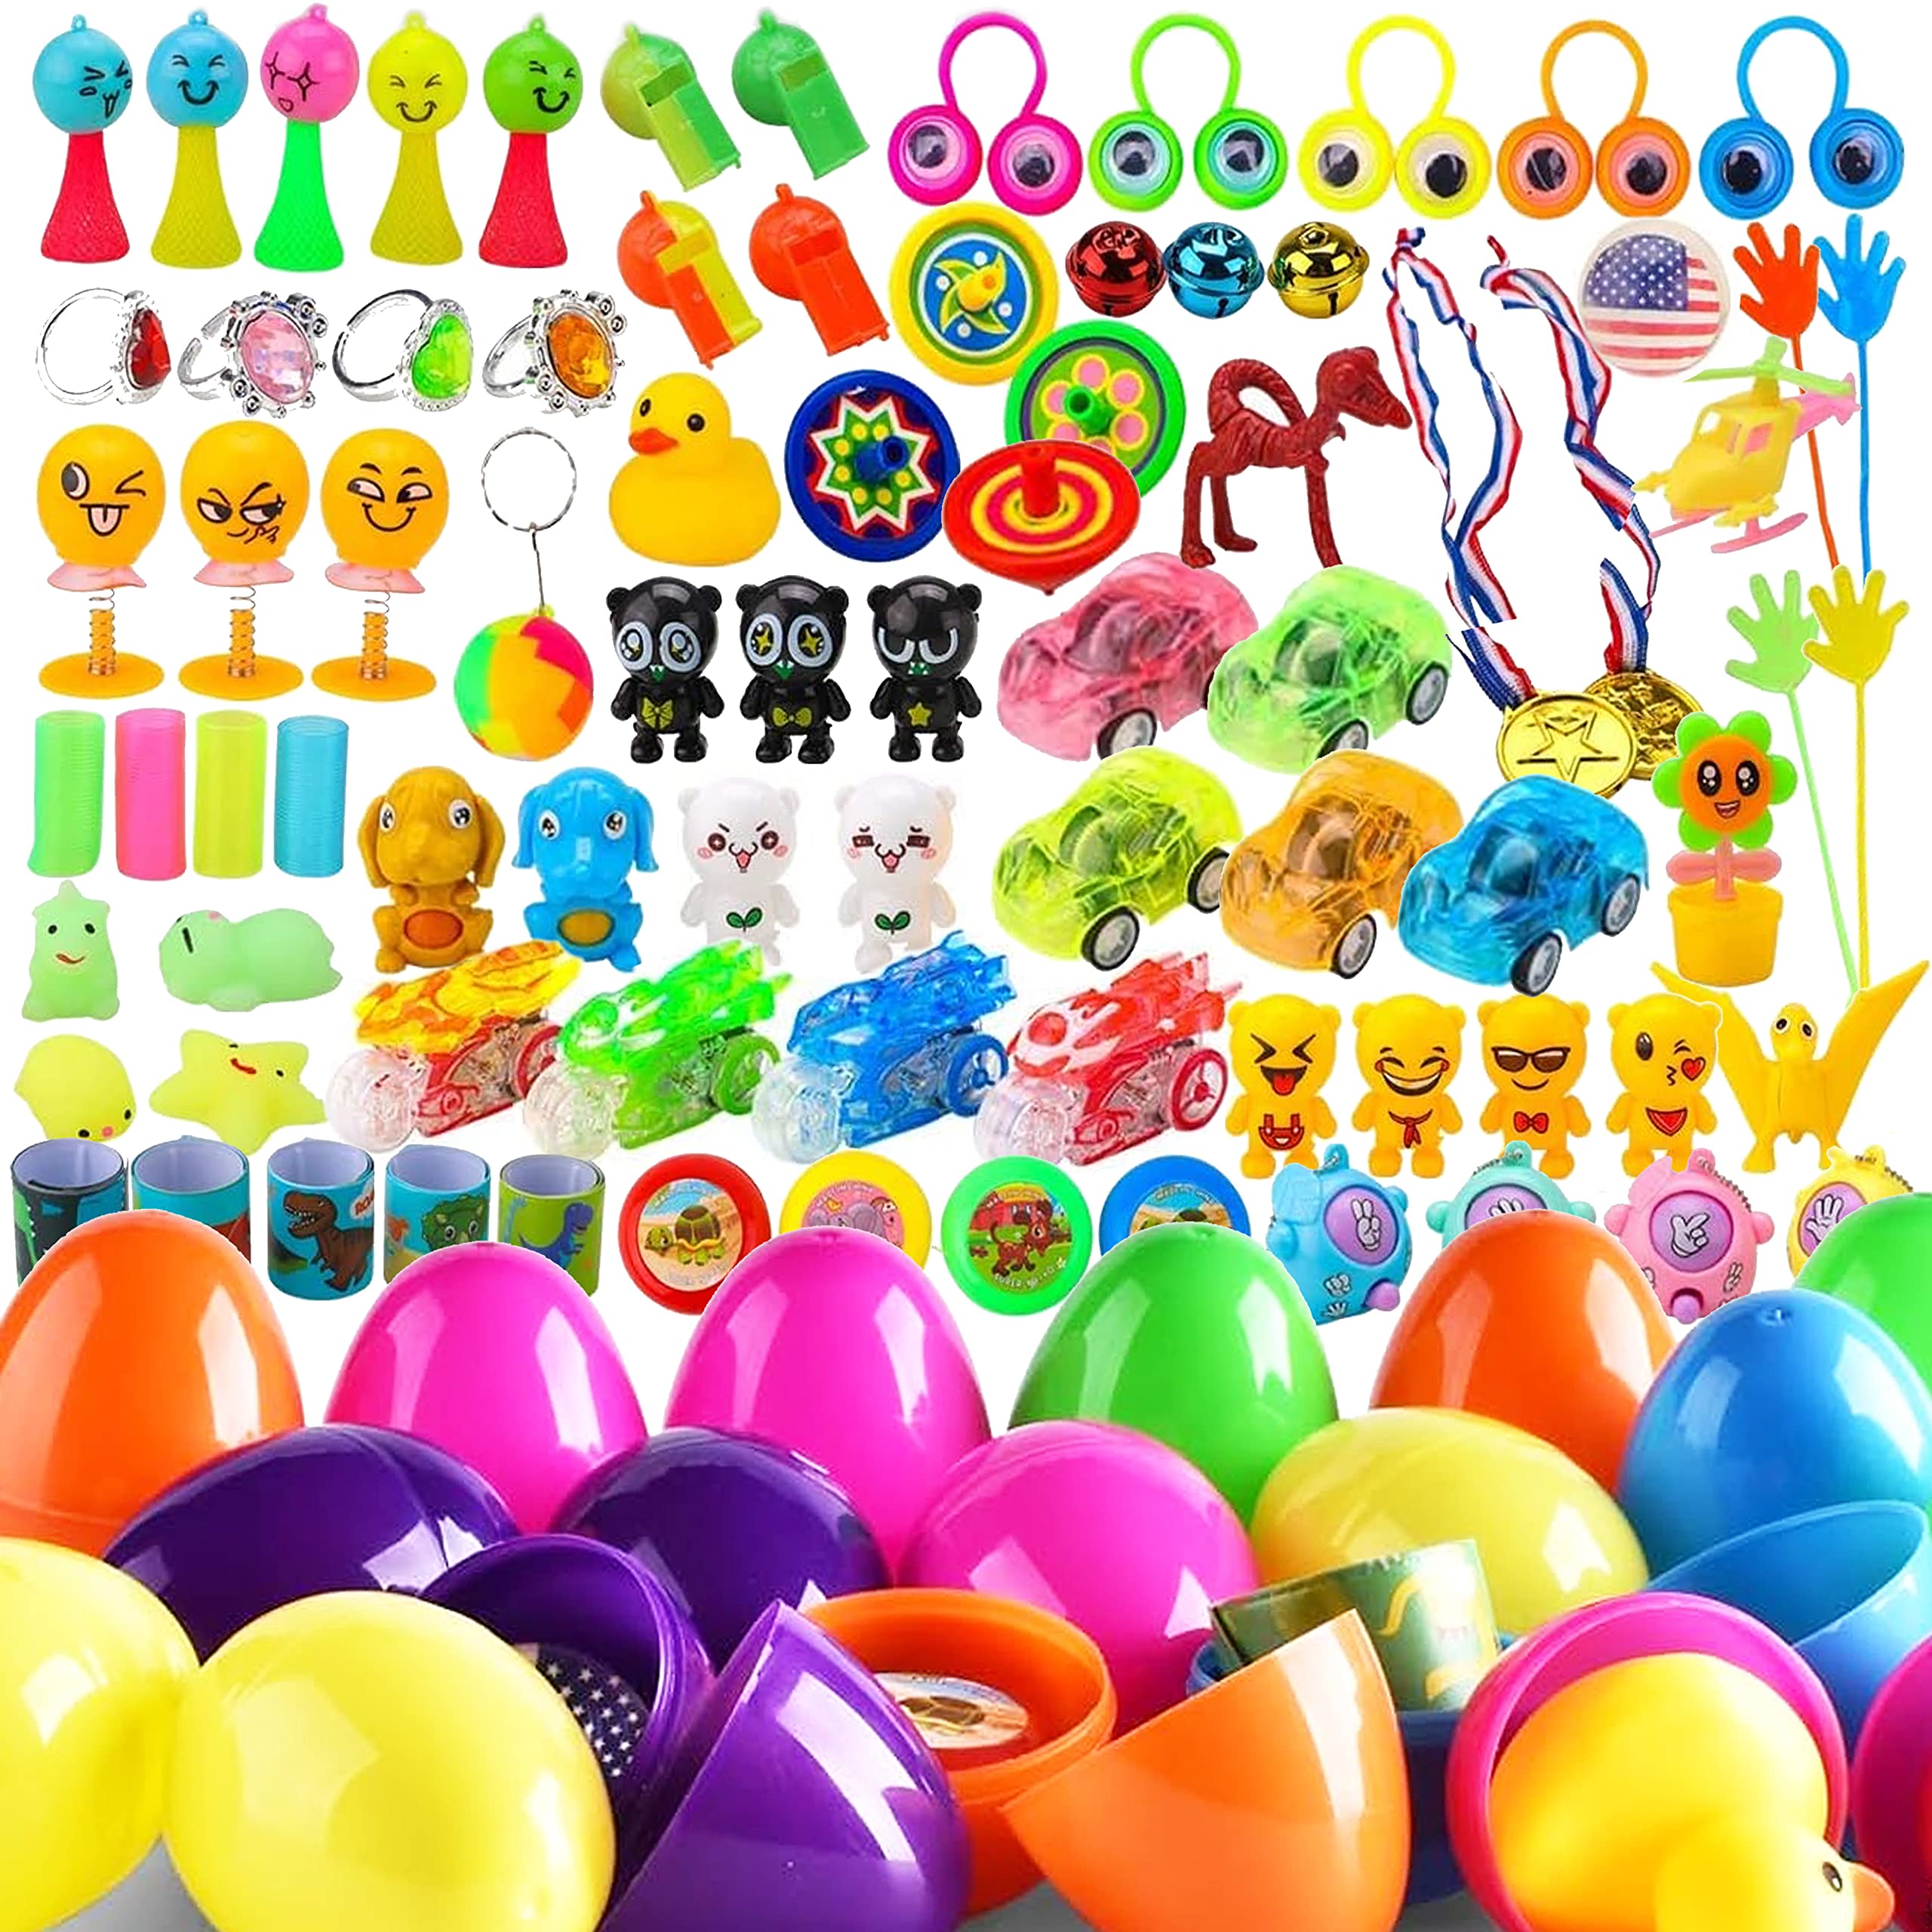 Book Cover Toys Filled Easter Eggs, 48 Pieces - Filled Surprise Eggs, Colorful Prefilled Plastic Easter Eggs with Different Kinds of Little Toys - Perfect for Easter Egg Hunt for Kids